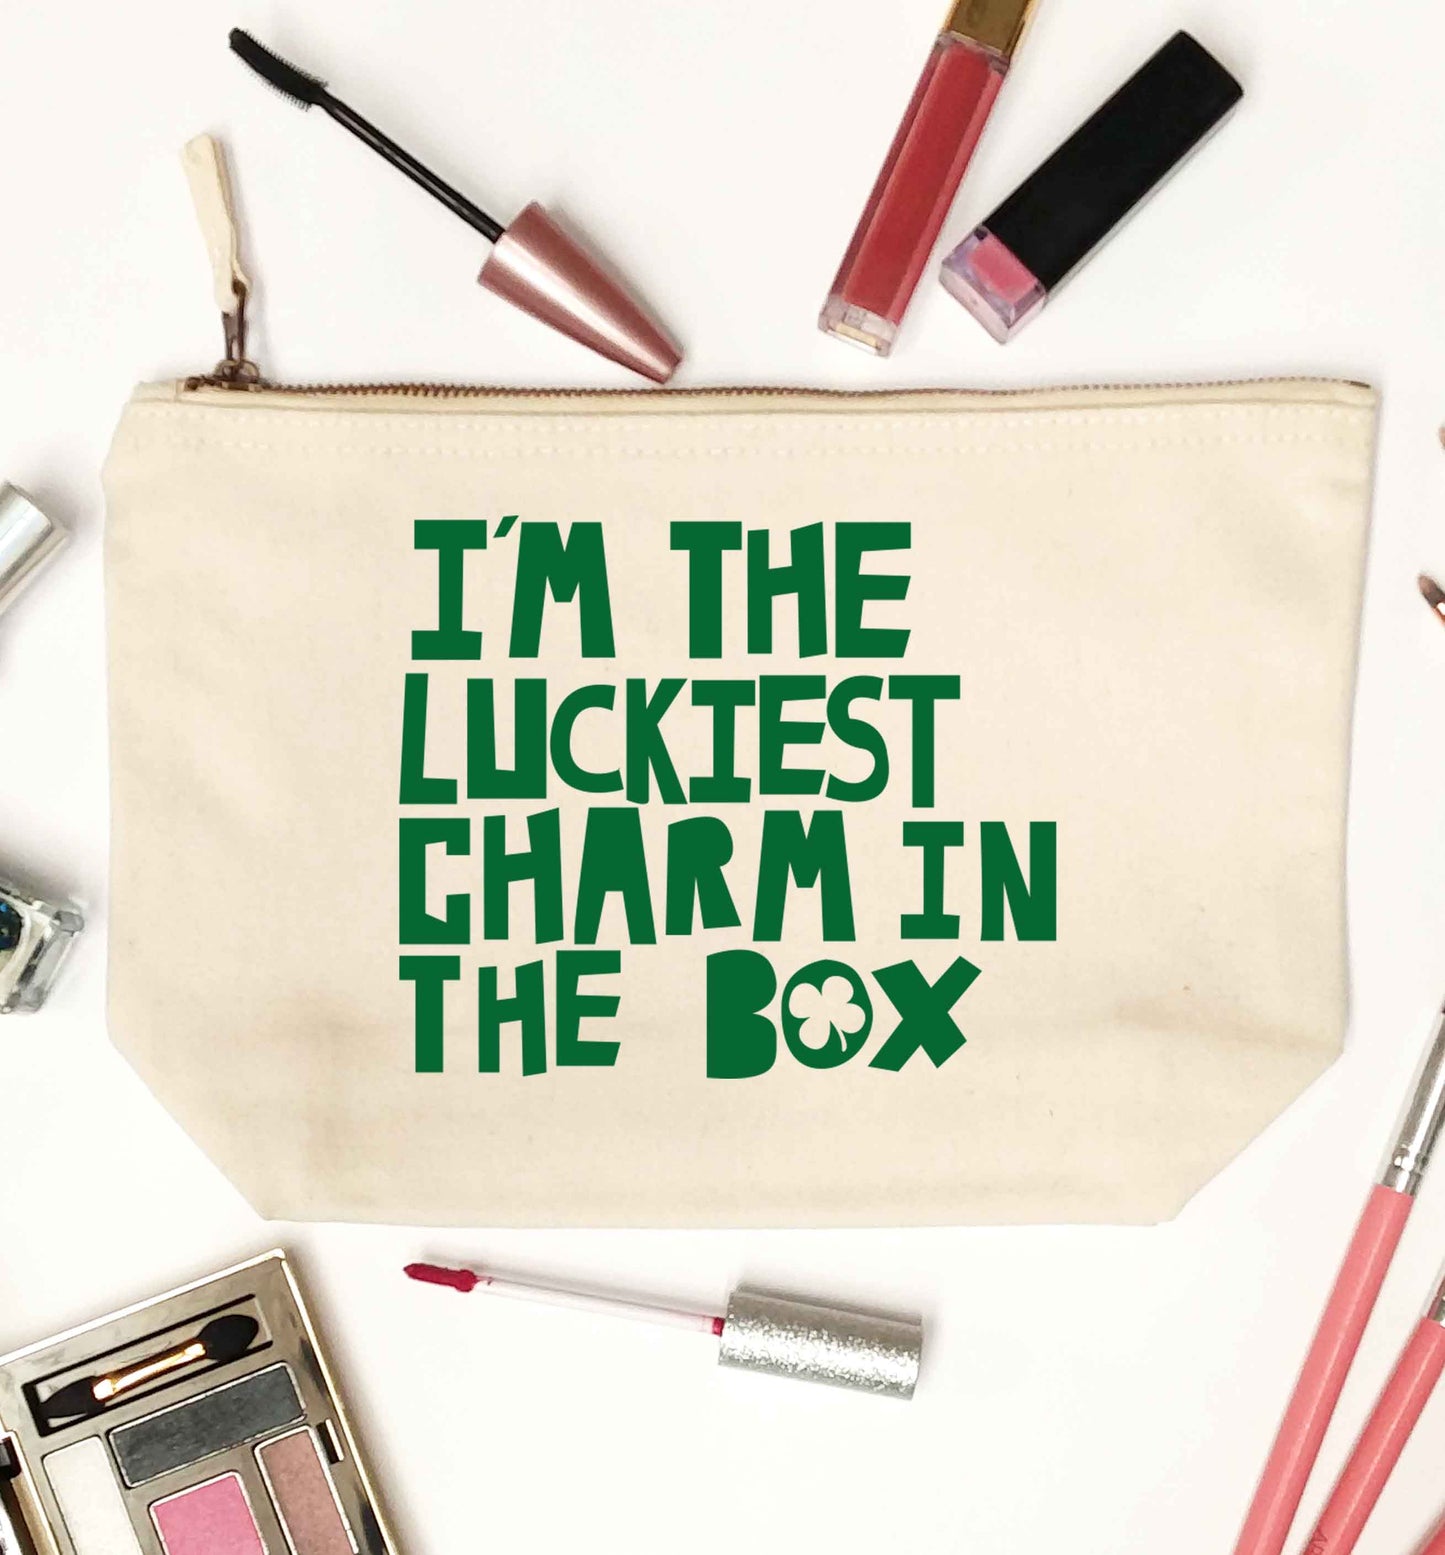 I'm the luckiest charm in the box natural makeup bag